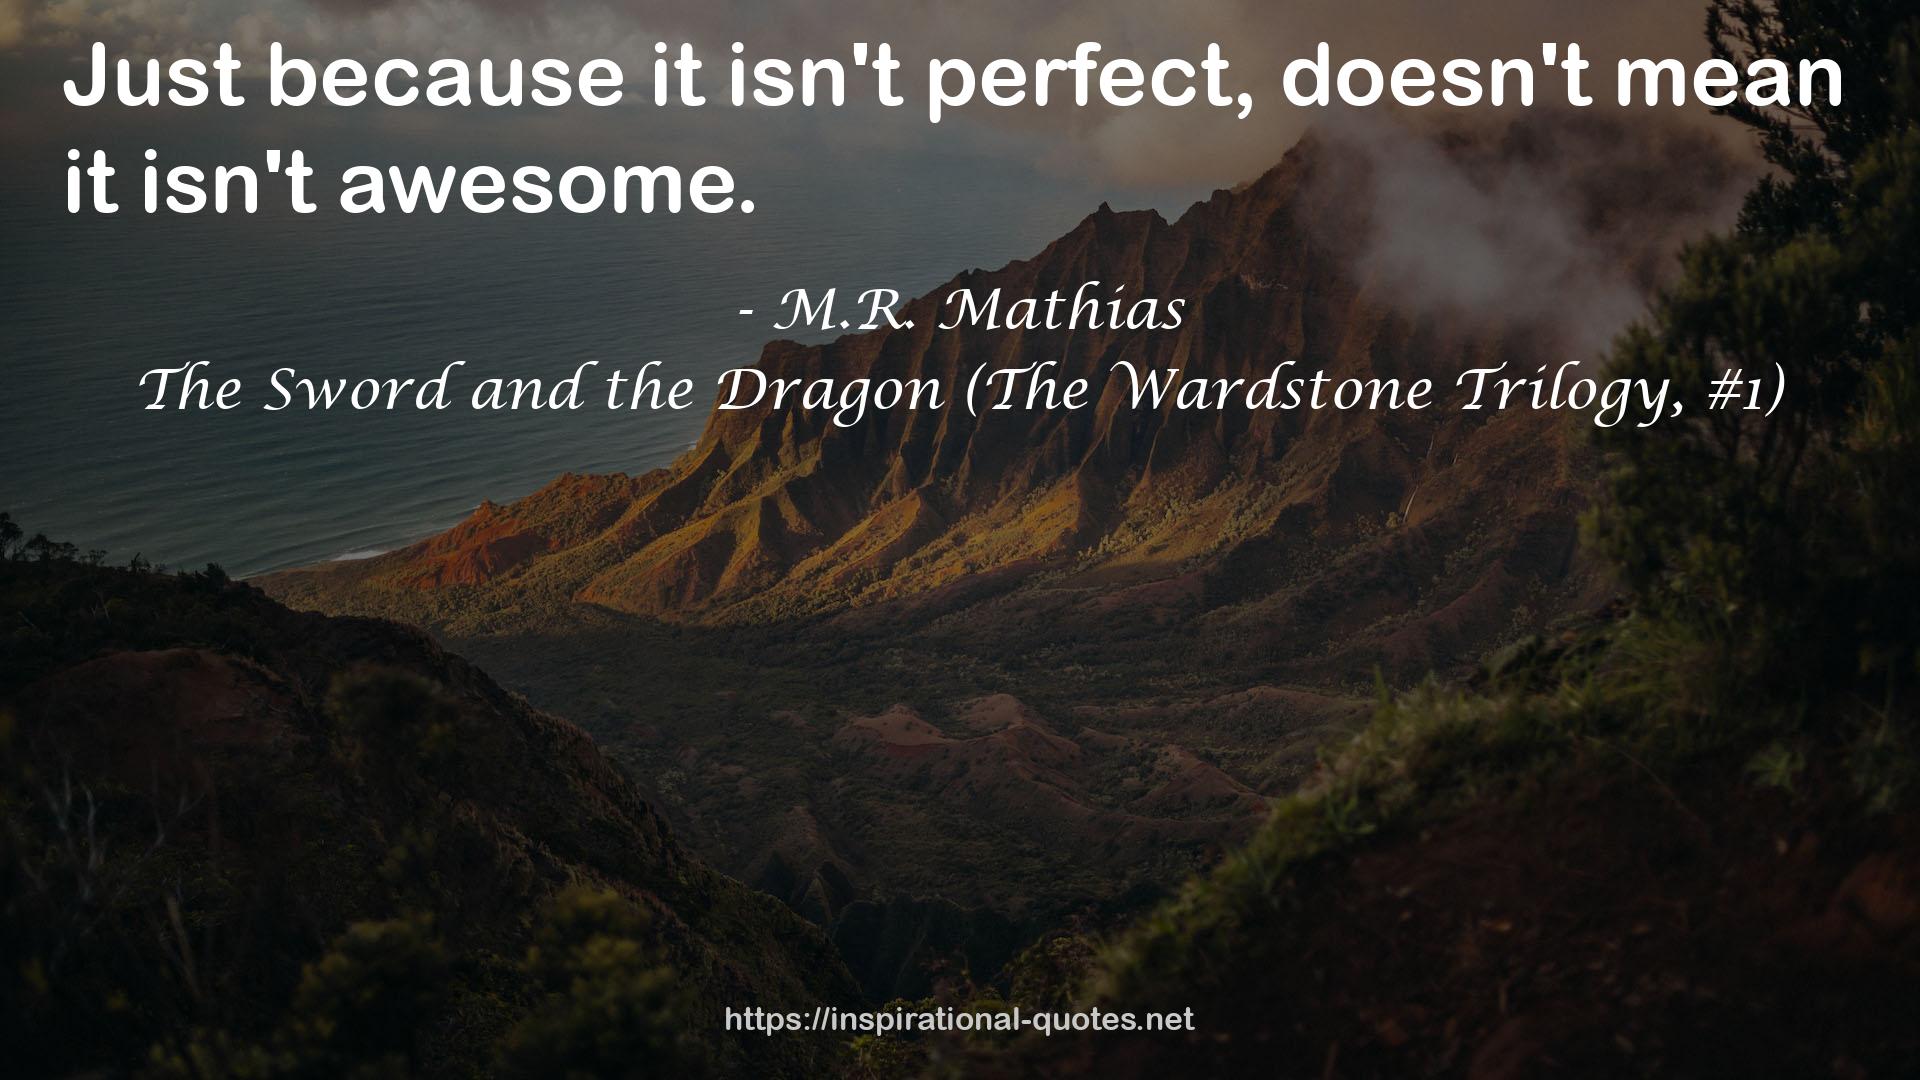 The Sword and the Dragon (The Wardstone Trilogy, #1) QUOTES